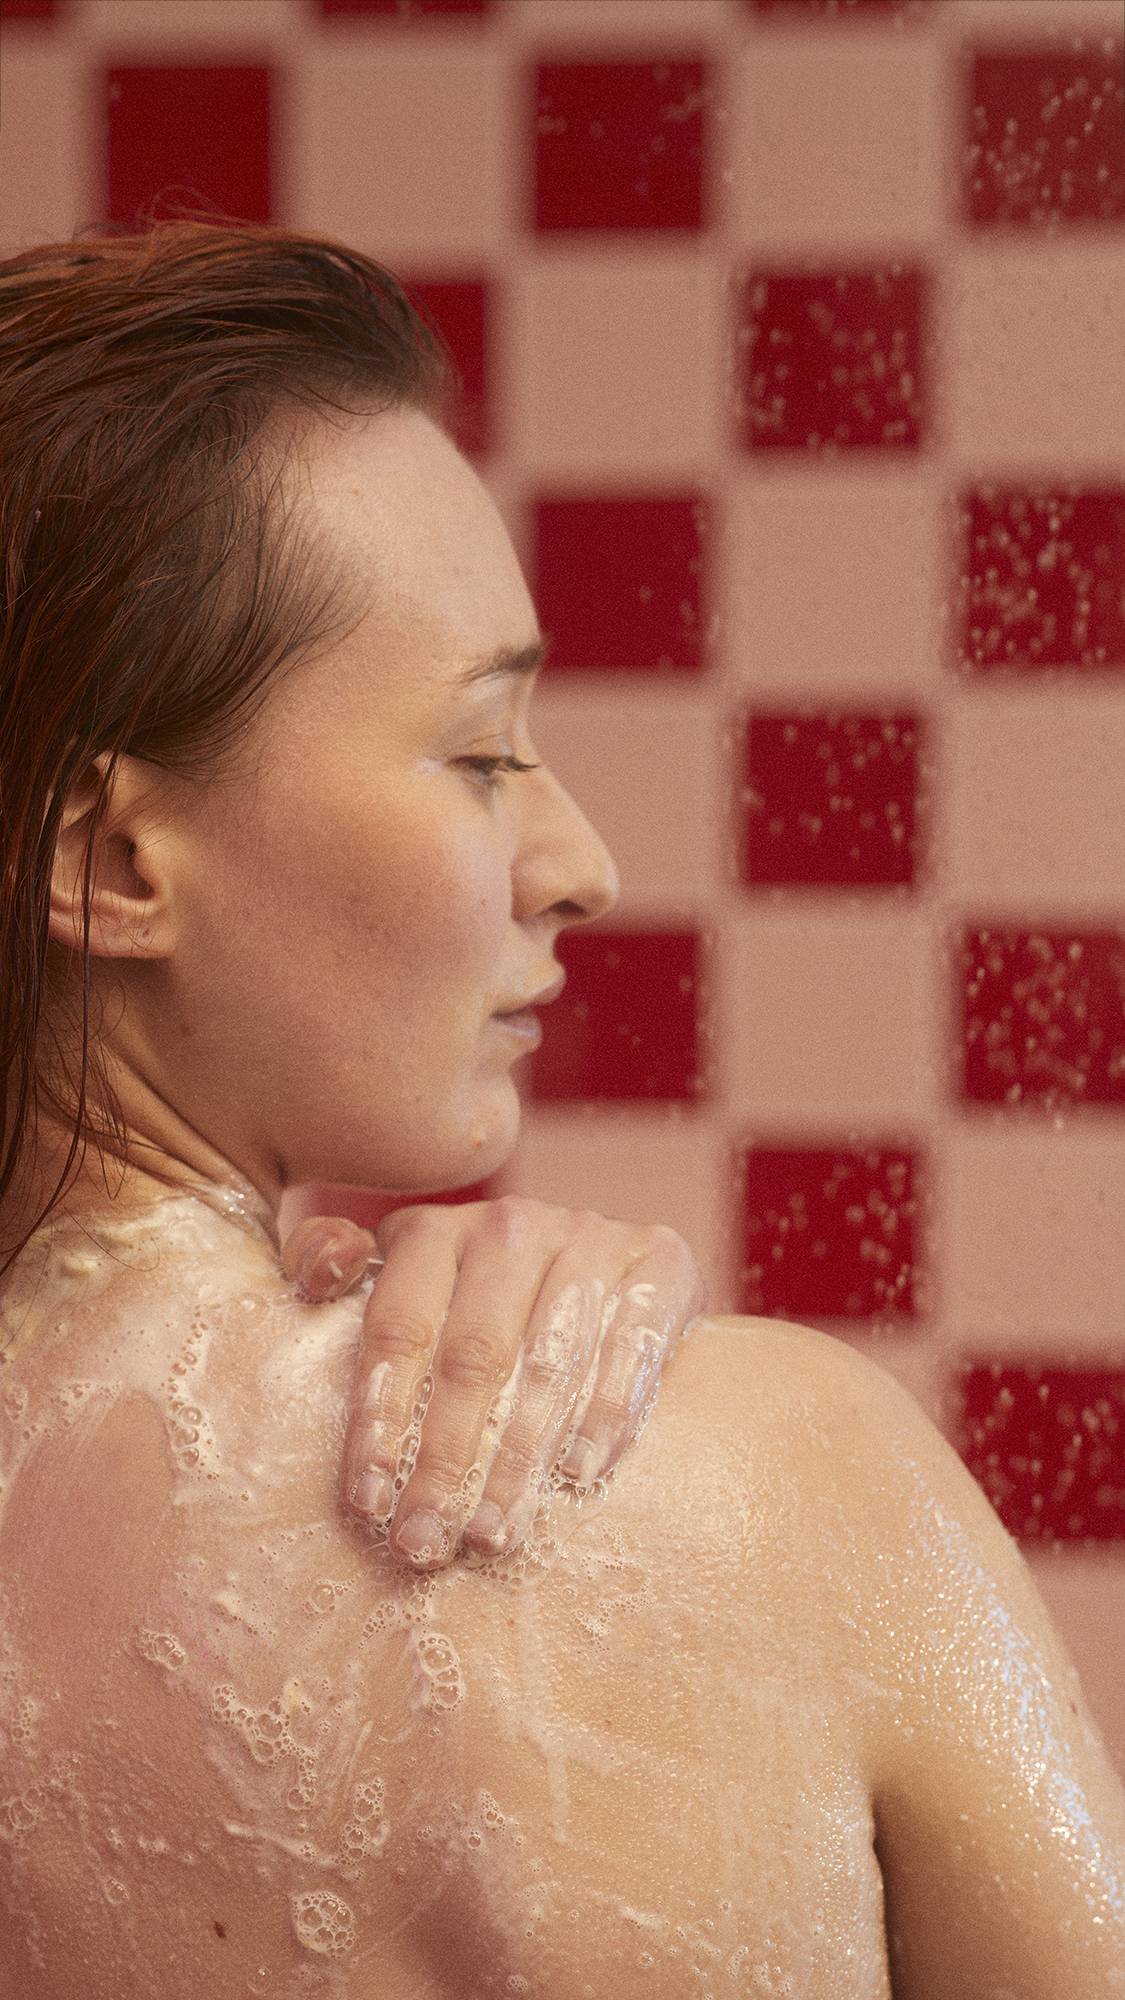 The model is in a tiled backroom under shower water as they lather their shoulder with Posh White Chocolate and Rose body wash. 